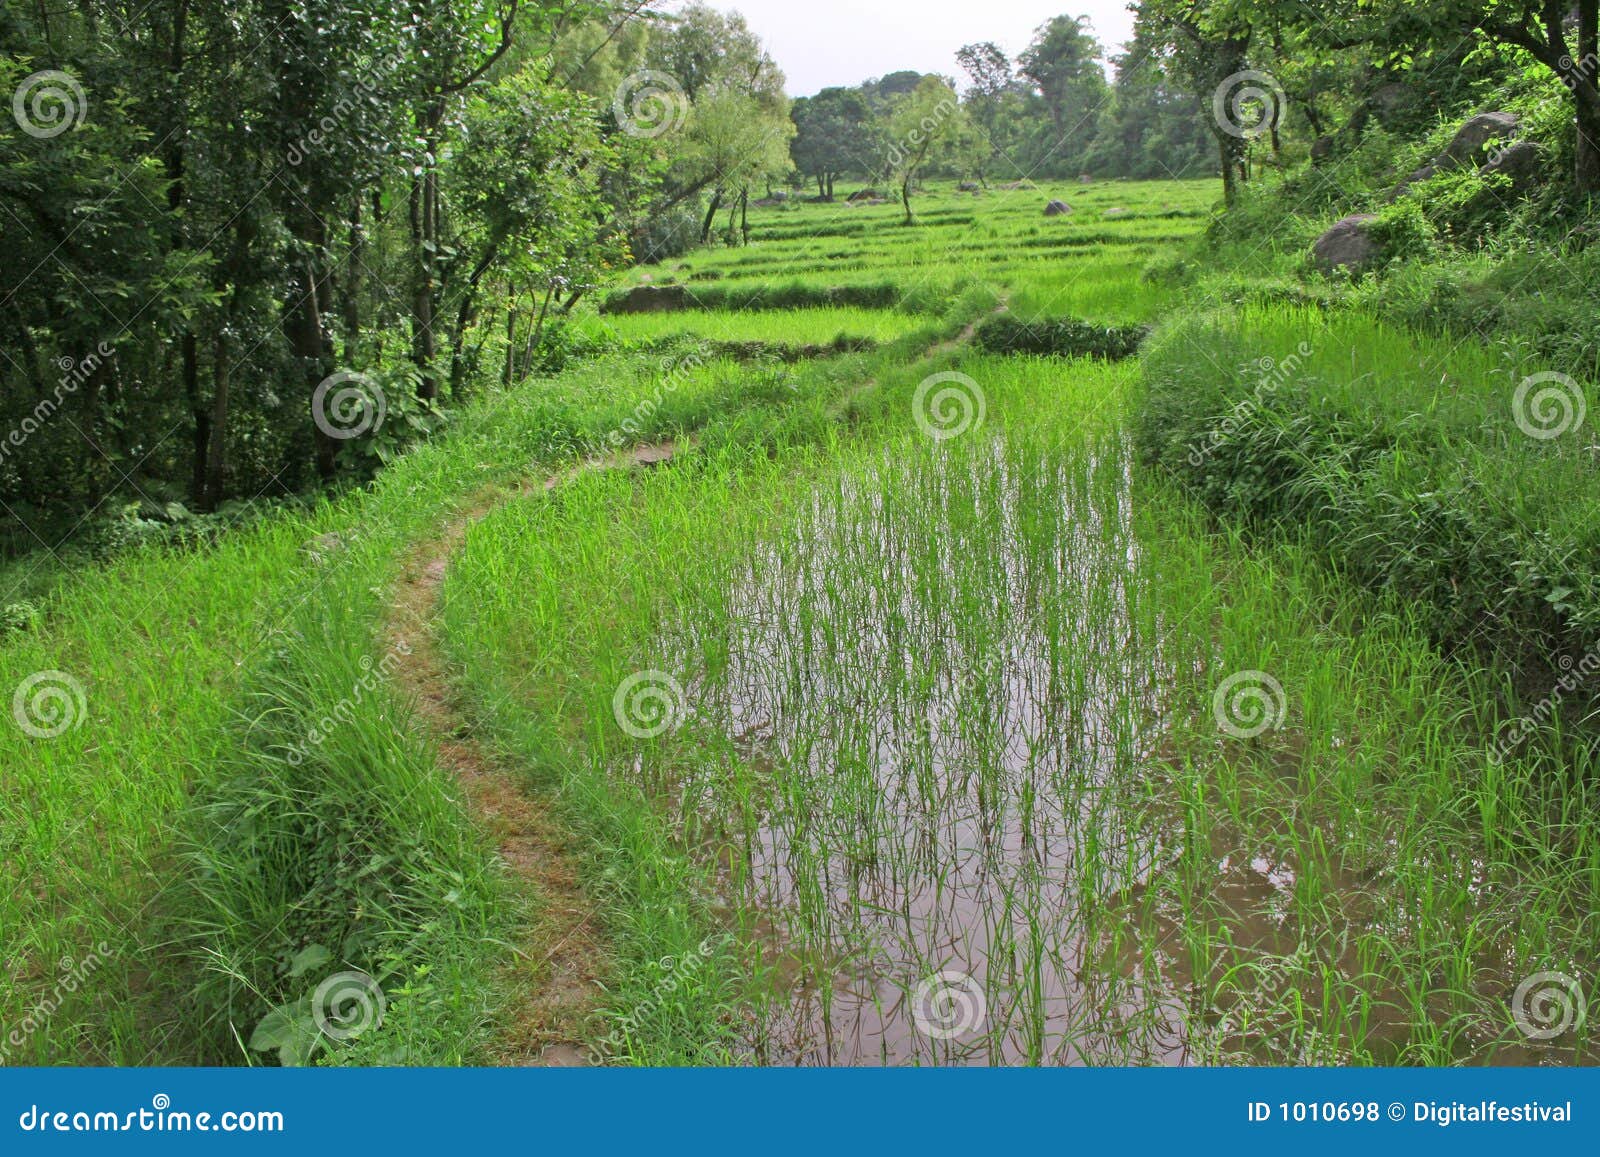 lush green paddy fields & rice cultivation